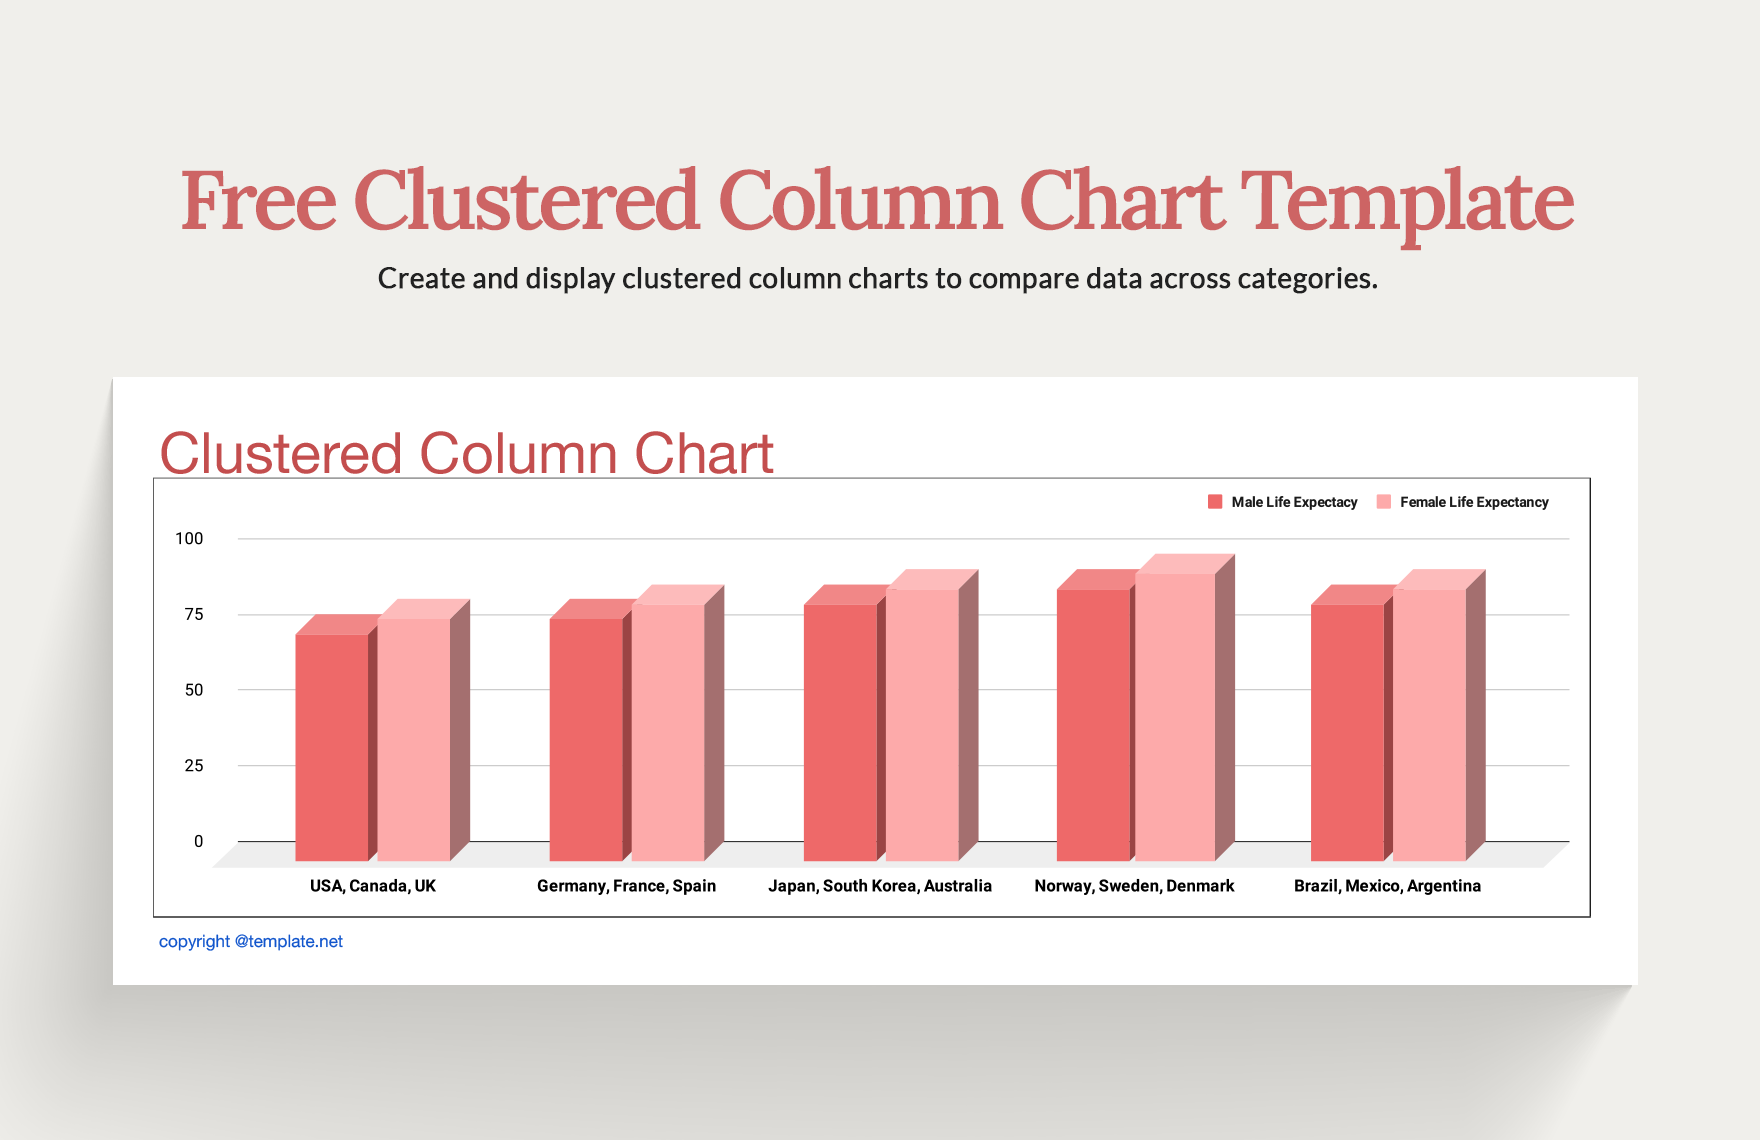 Clustered Column Chart Template